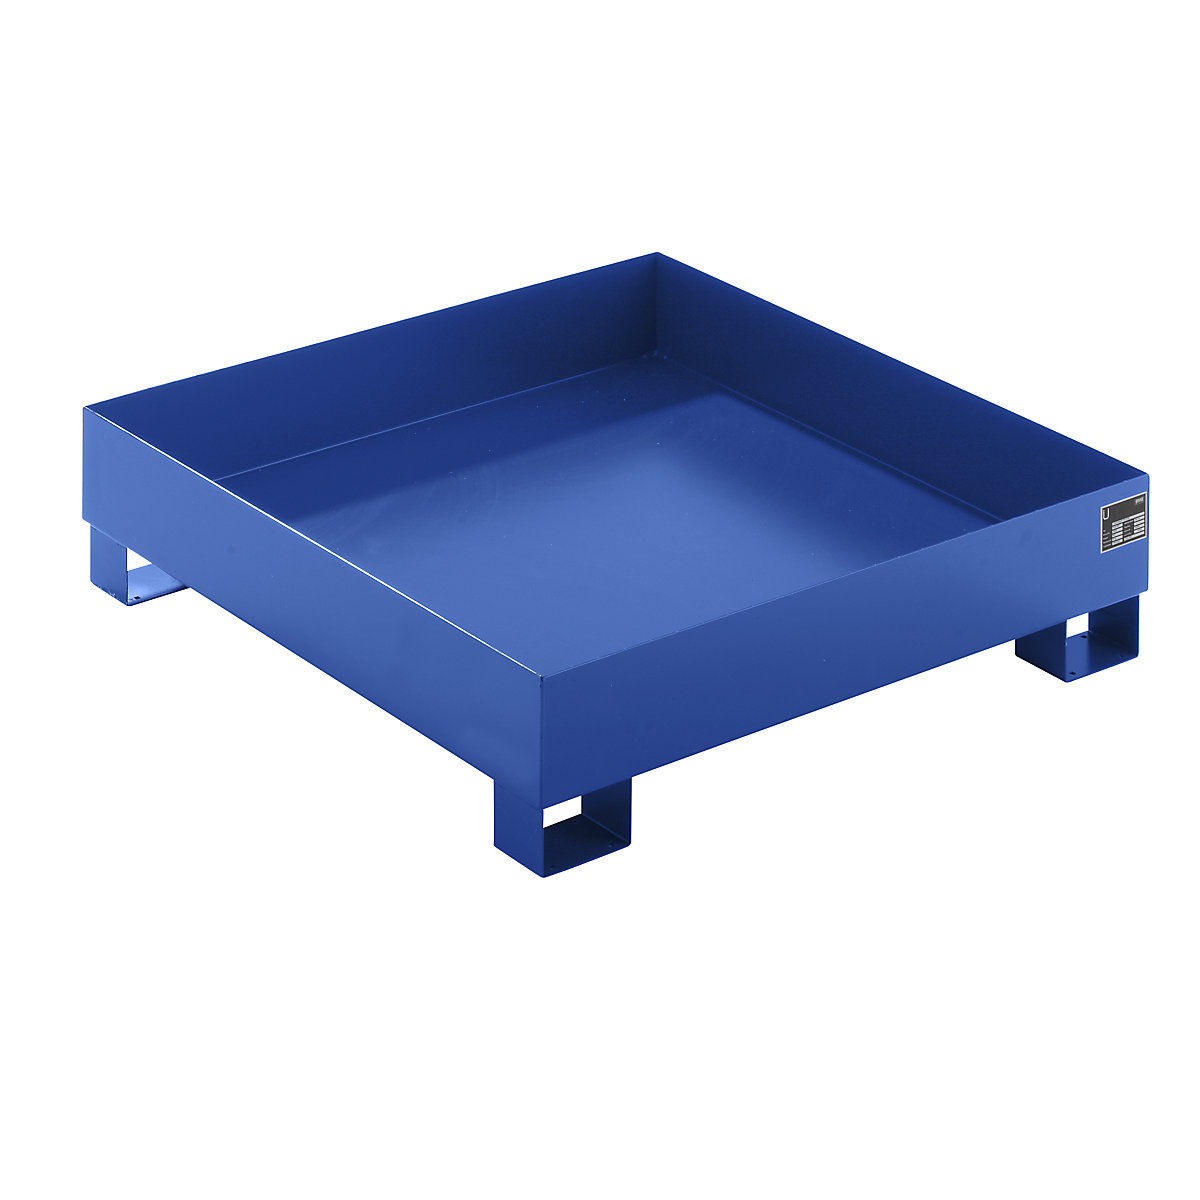 EUROKRAFTbasic – Sump tray made from sheet steel, LxWxH 1200 x 1200 x 285 mm, blue RAL 5012